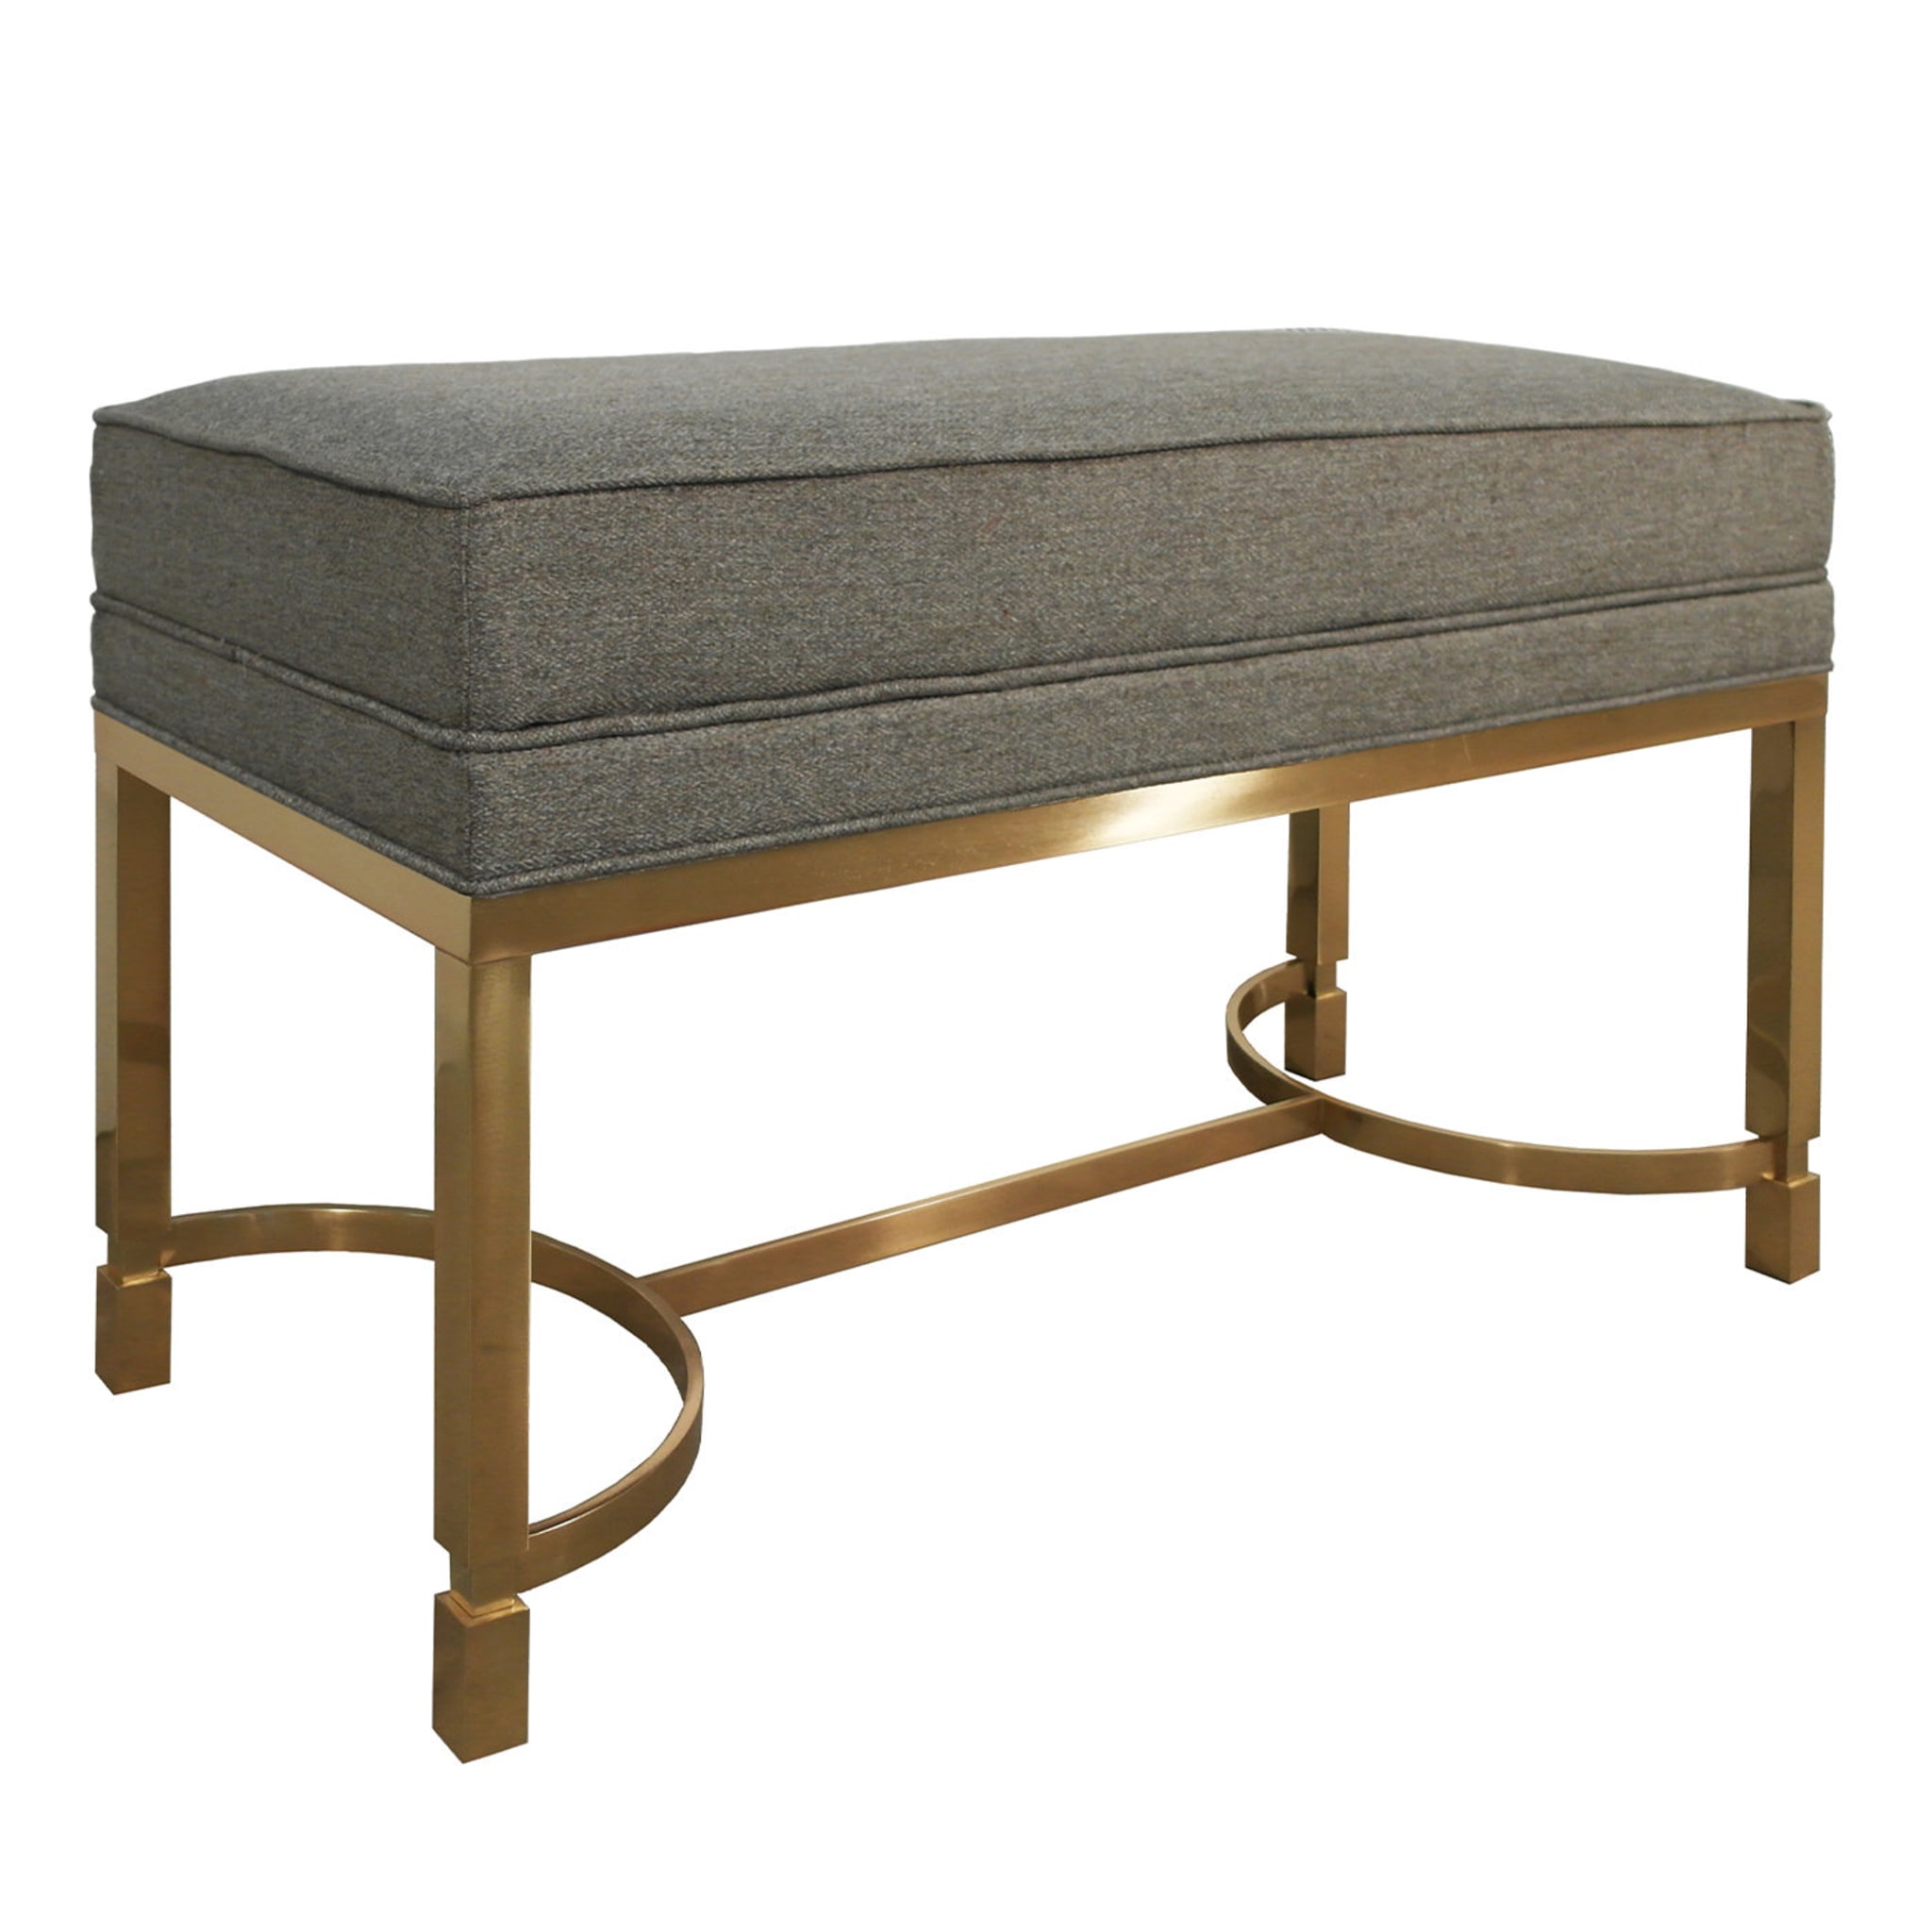 Plain Upholstered Bench - Main view